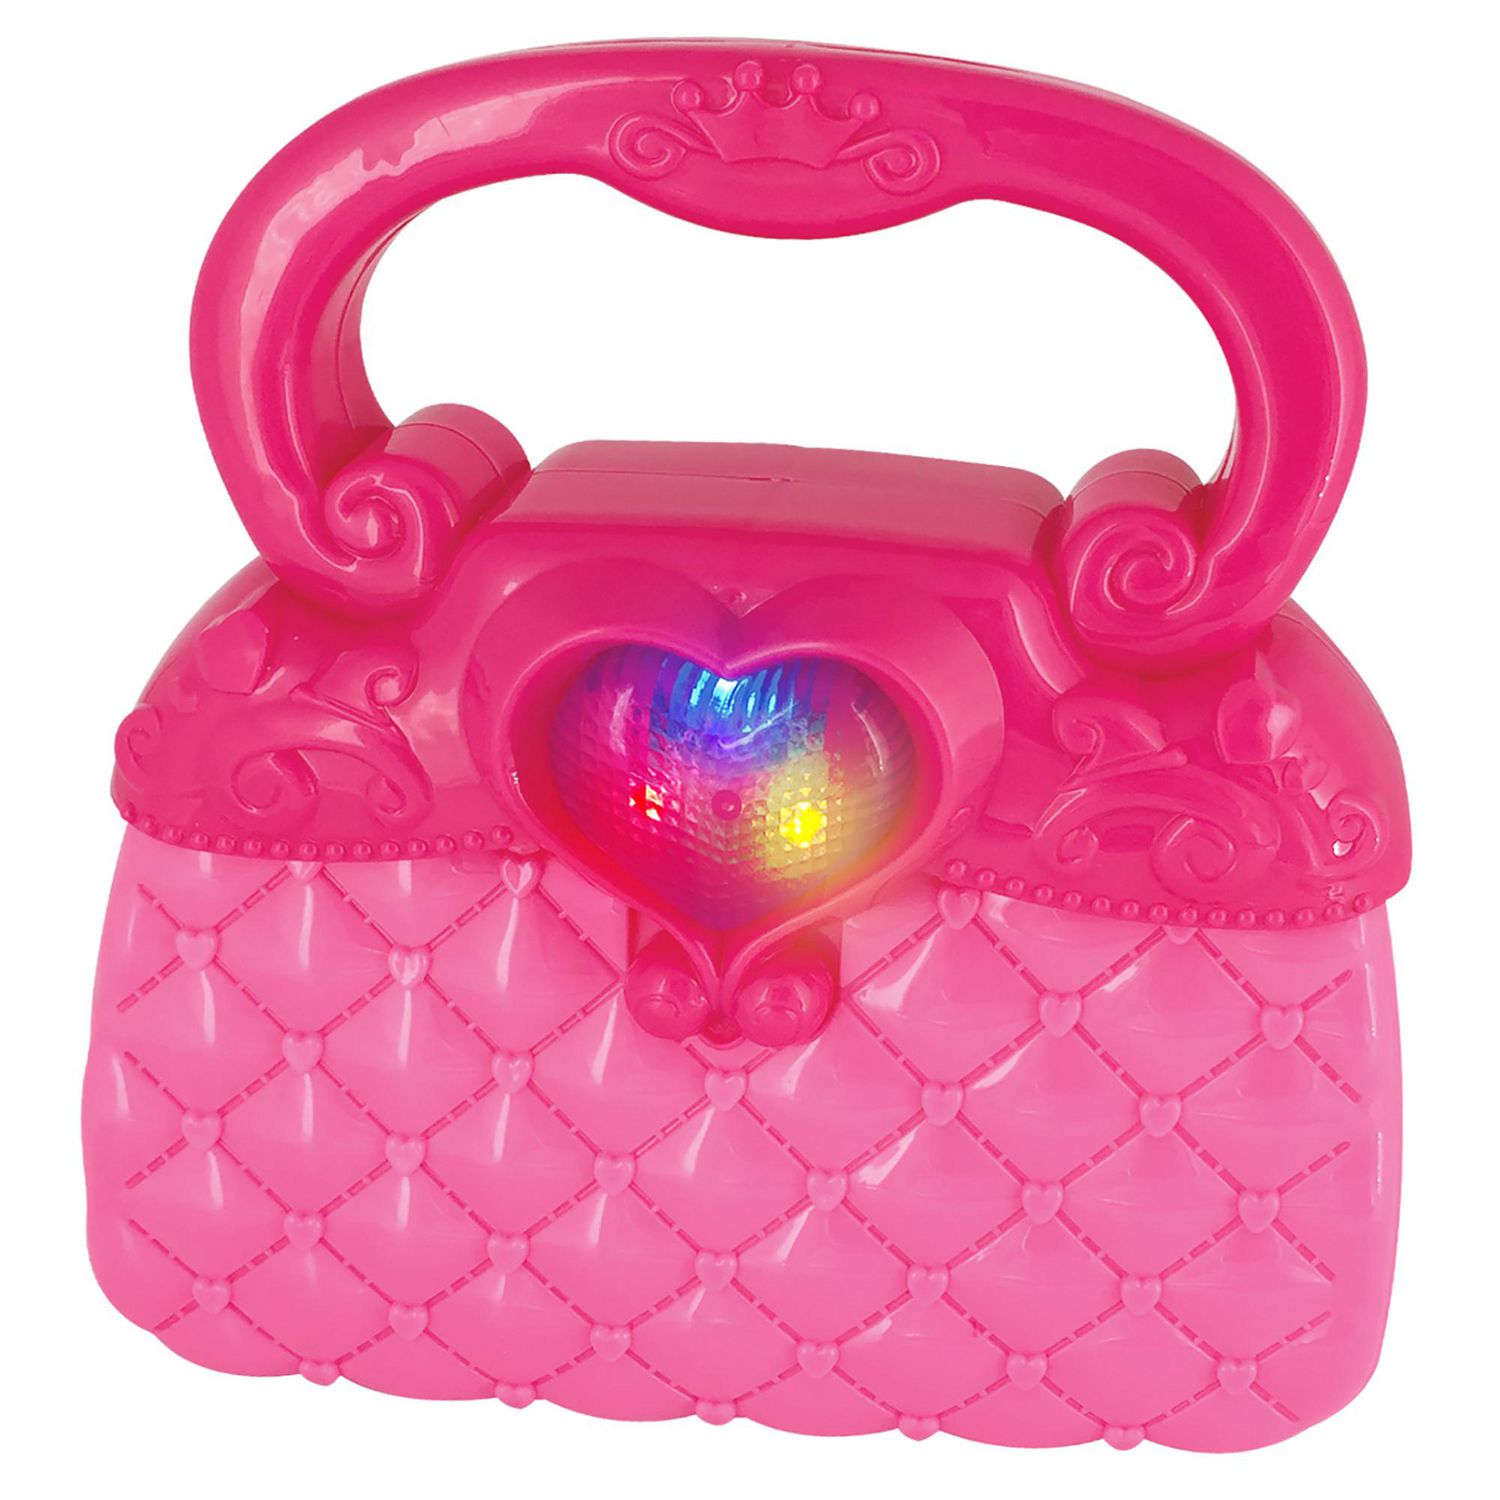 Buy Playkidz Princess My First Purse Set - 8 Pieces Kids Play Purse and  Accessories, Pretend Play Toy Set with Cool Girl Accessories, Includes  Phone and Bag with Lights and Sound. Online